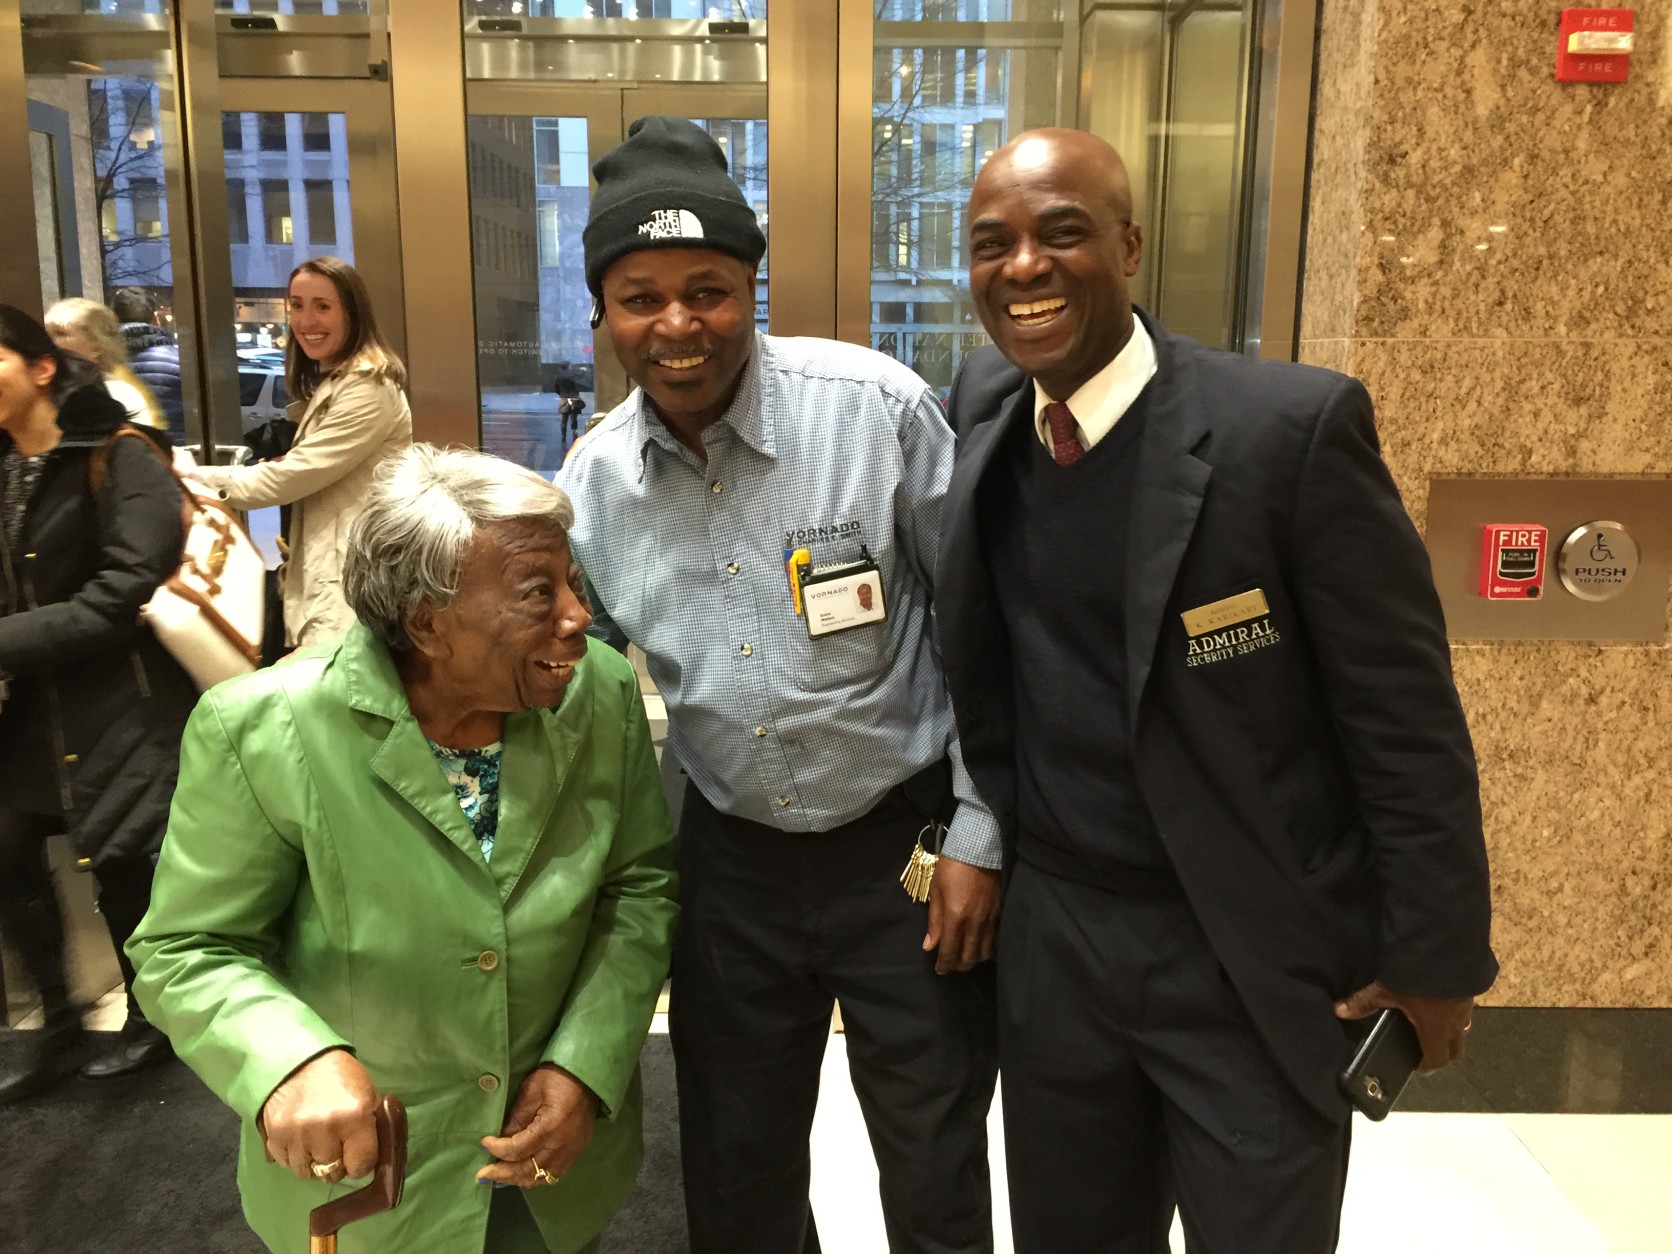 Euton Watson of Bowie, Md. and security officer Kwest Karikari welcome McLaurin to the downtown office building where the 106-year-old White House dancer had yet another interview with media about her experience. (WTOP/Kristi King)